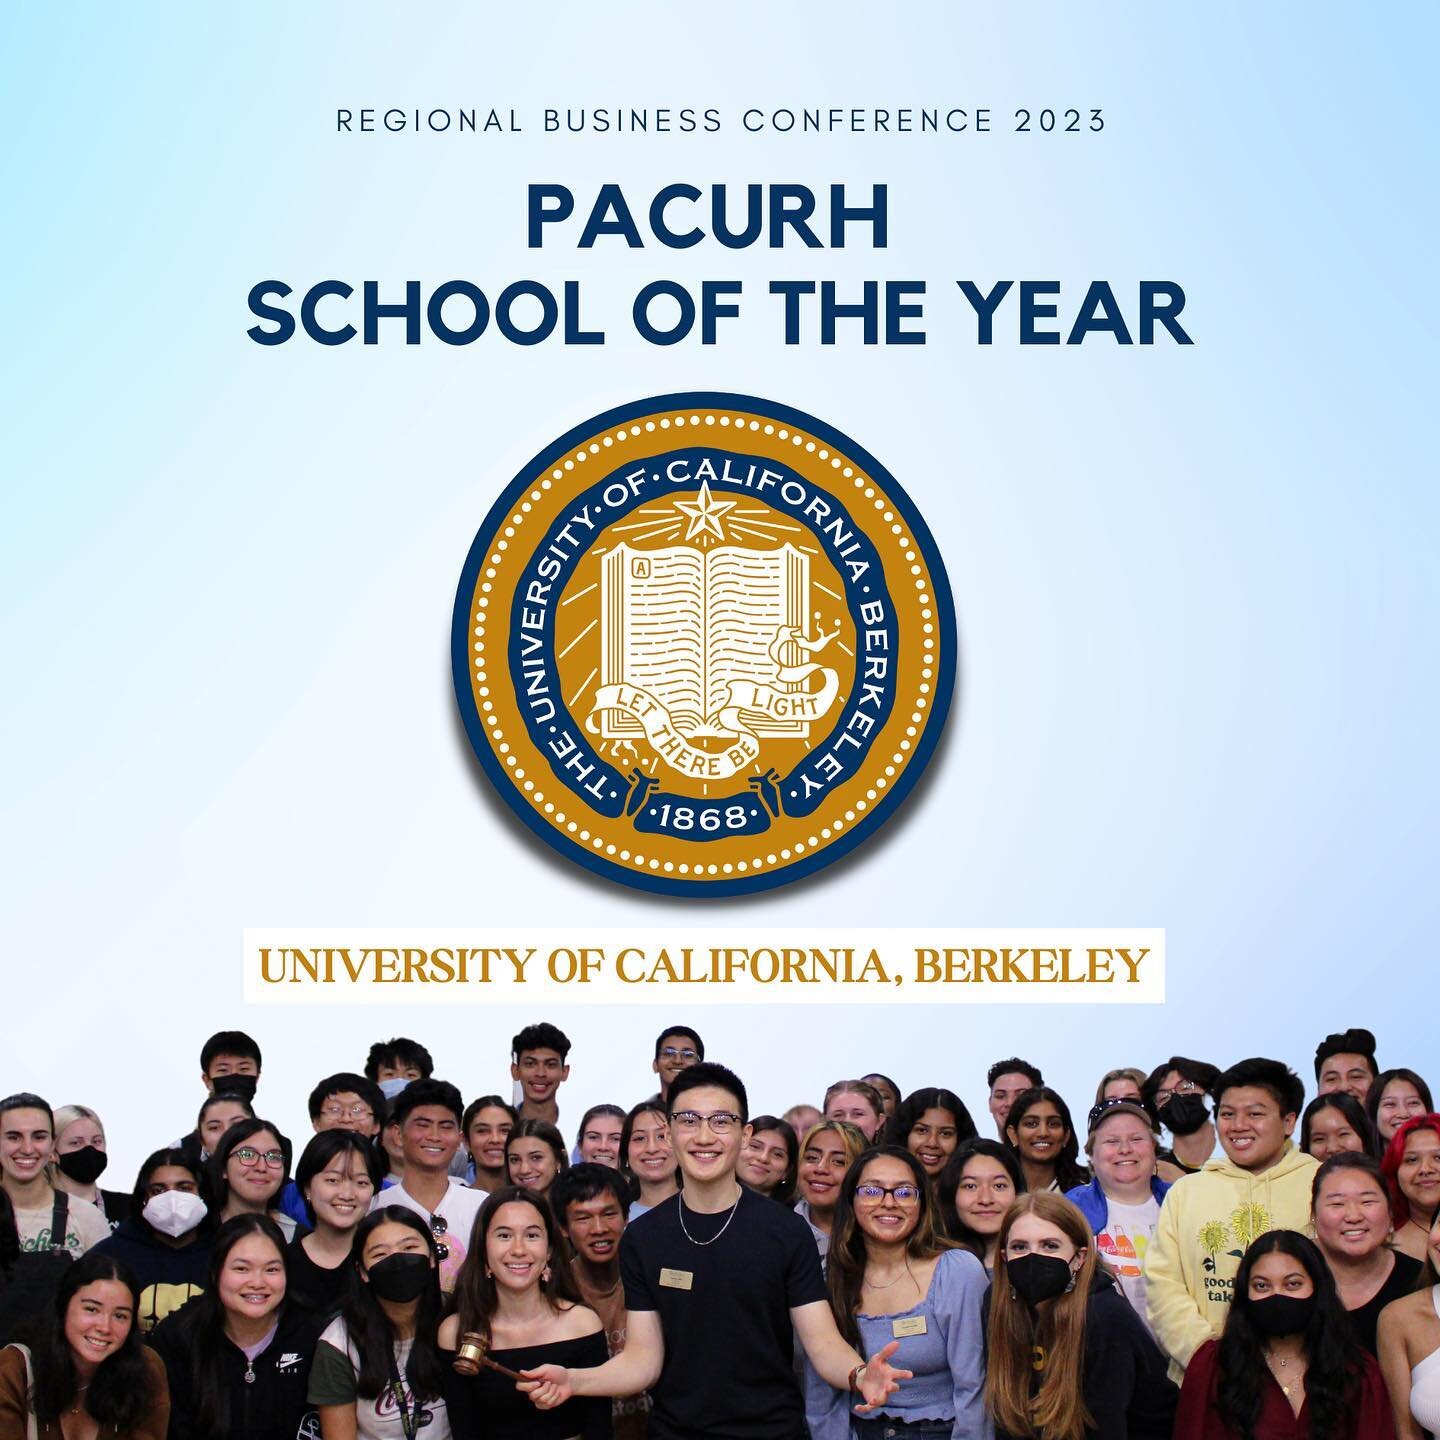 🎉 We are truly honored to announce that we&rsquo;ve won the PACURH School of the Year Award! This incredible achievement is a testament to the hard work and dedication of our amazing students and staff in RHA and NRHH. Let&rsquo;s keep building a st